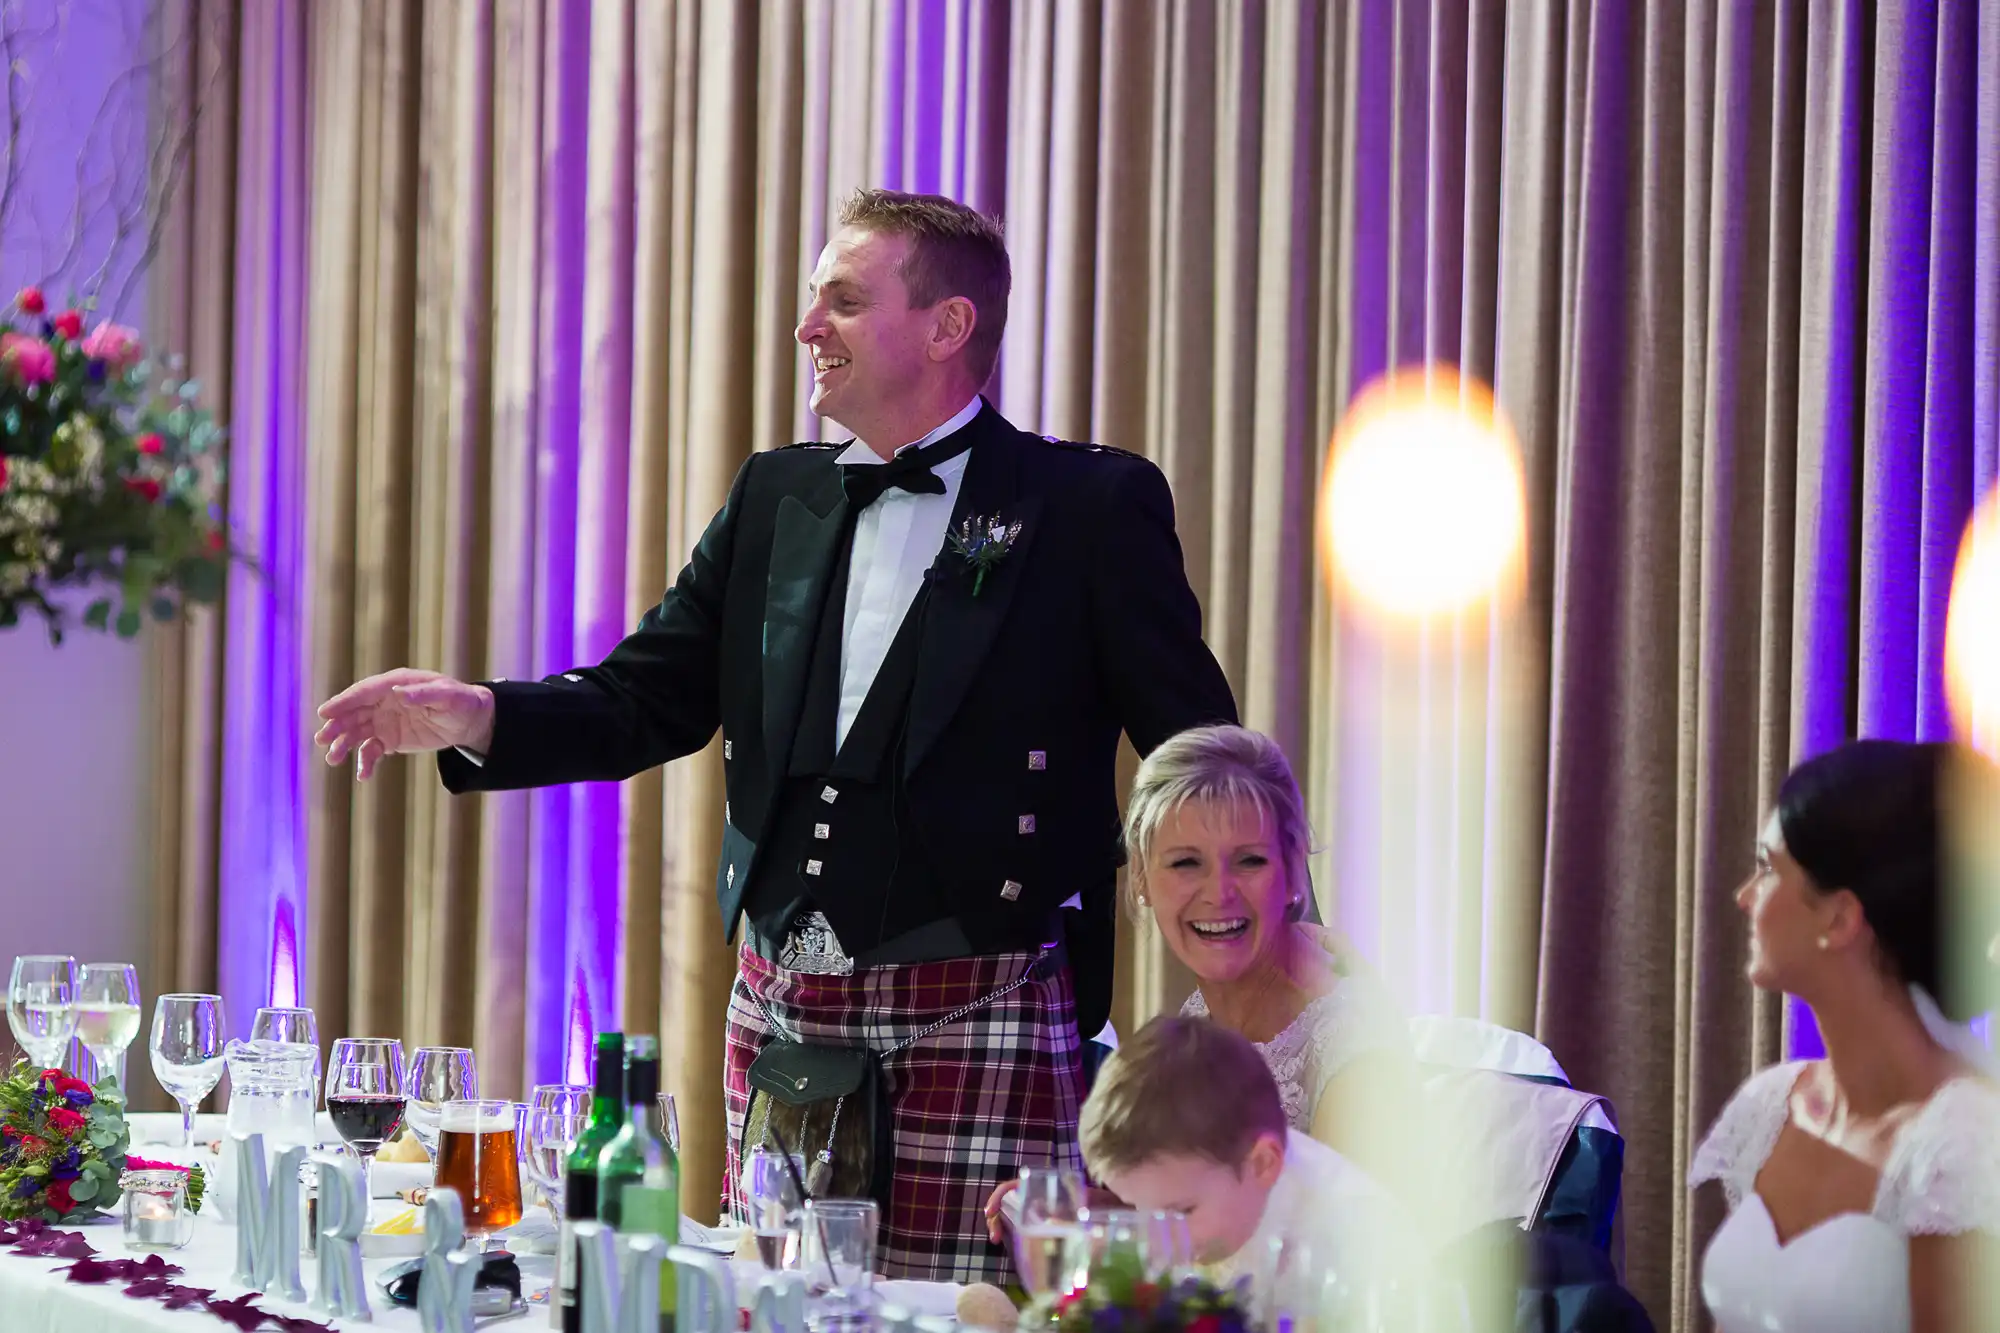 A man in a kilt and tuxedo jacket smiling and gesturing at a wedding reception, with seated guests laughing and enjoying around him.